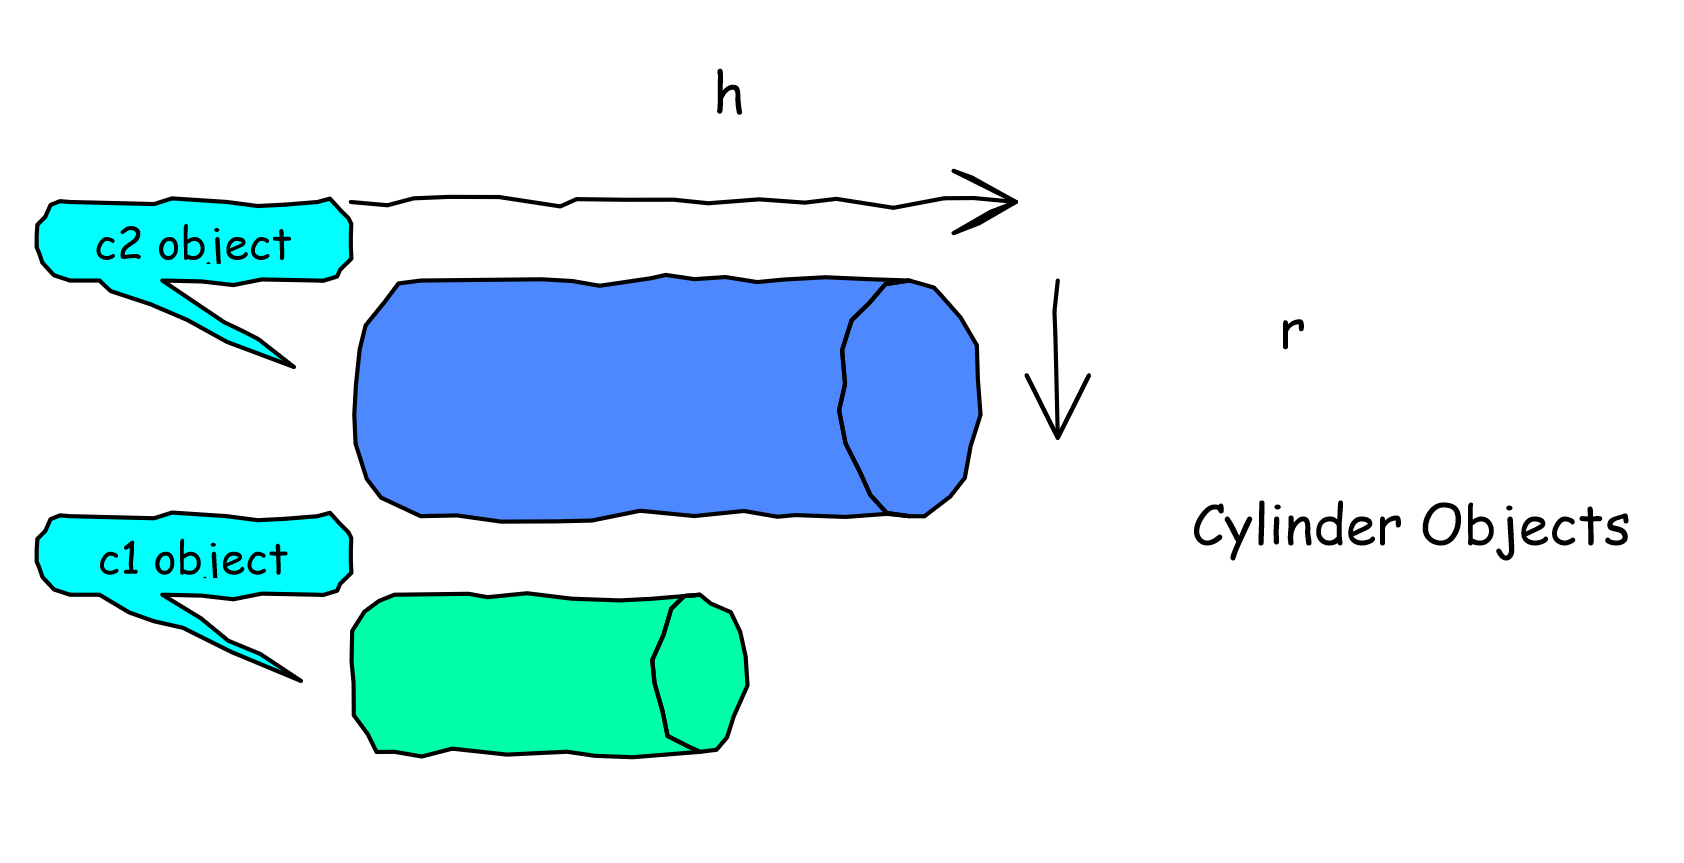 Two Cylinder objects